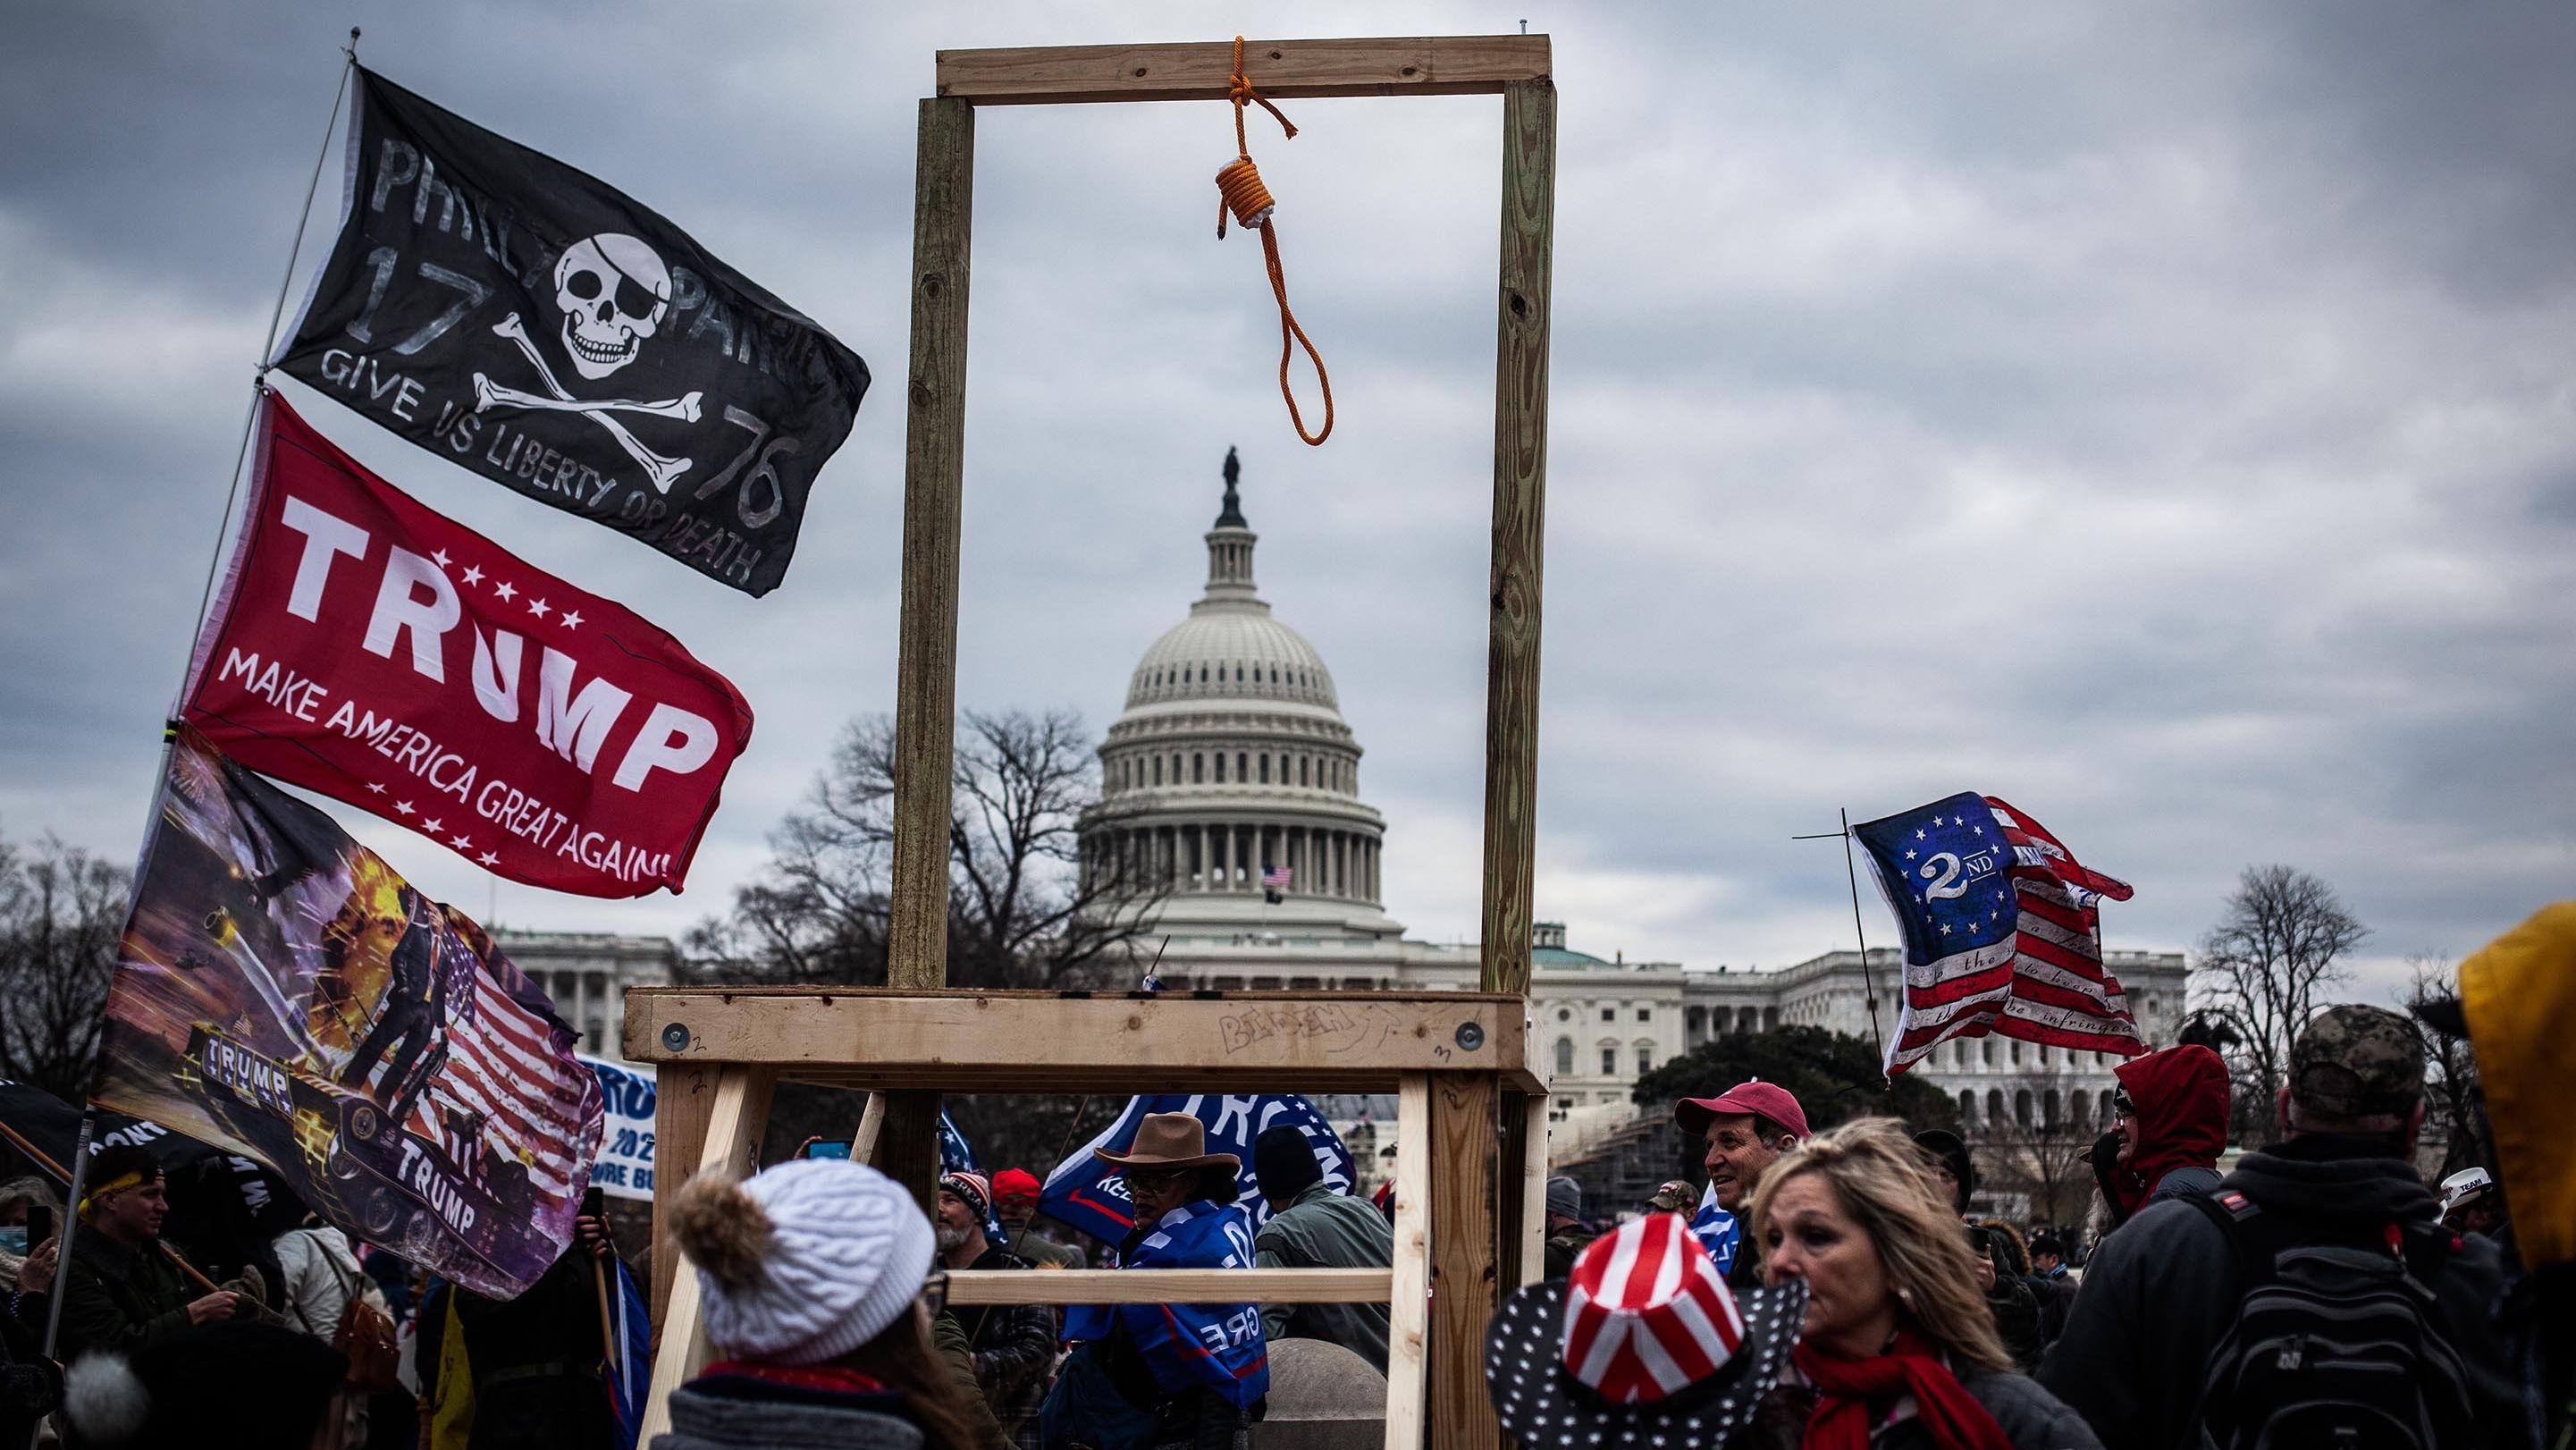 A noose is seen near Trump supporters gathered outside the Capitol.